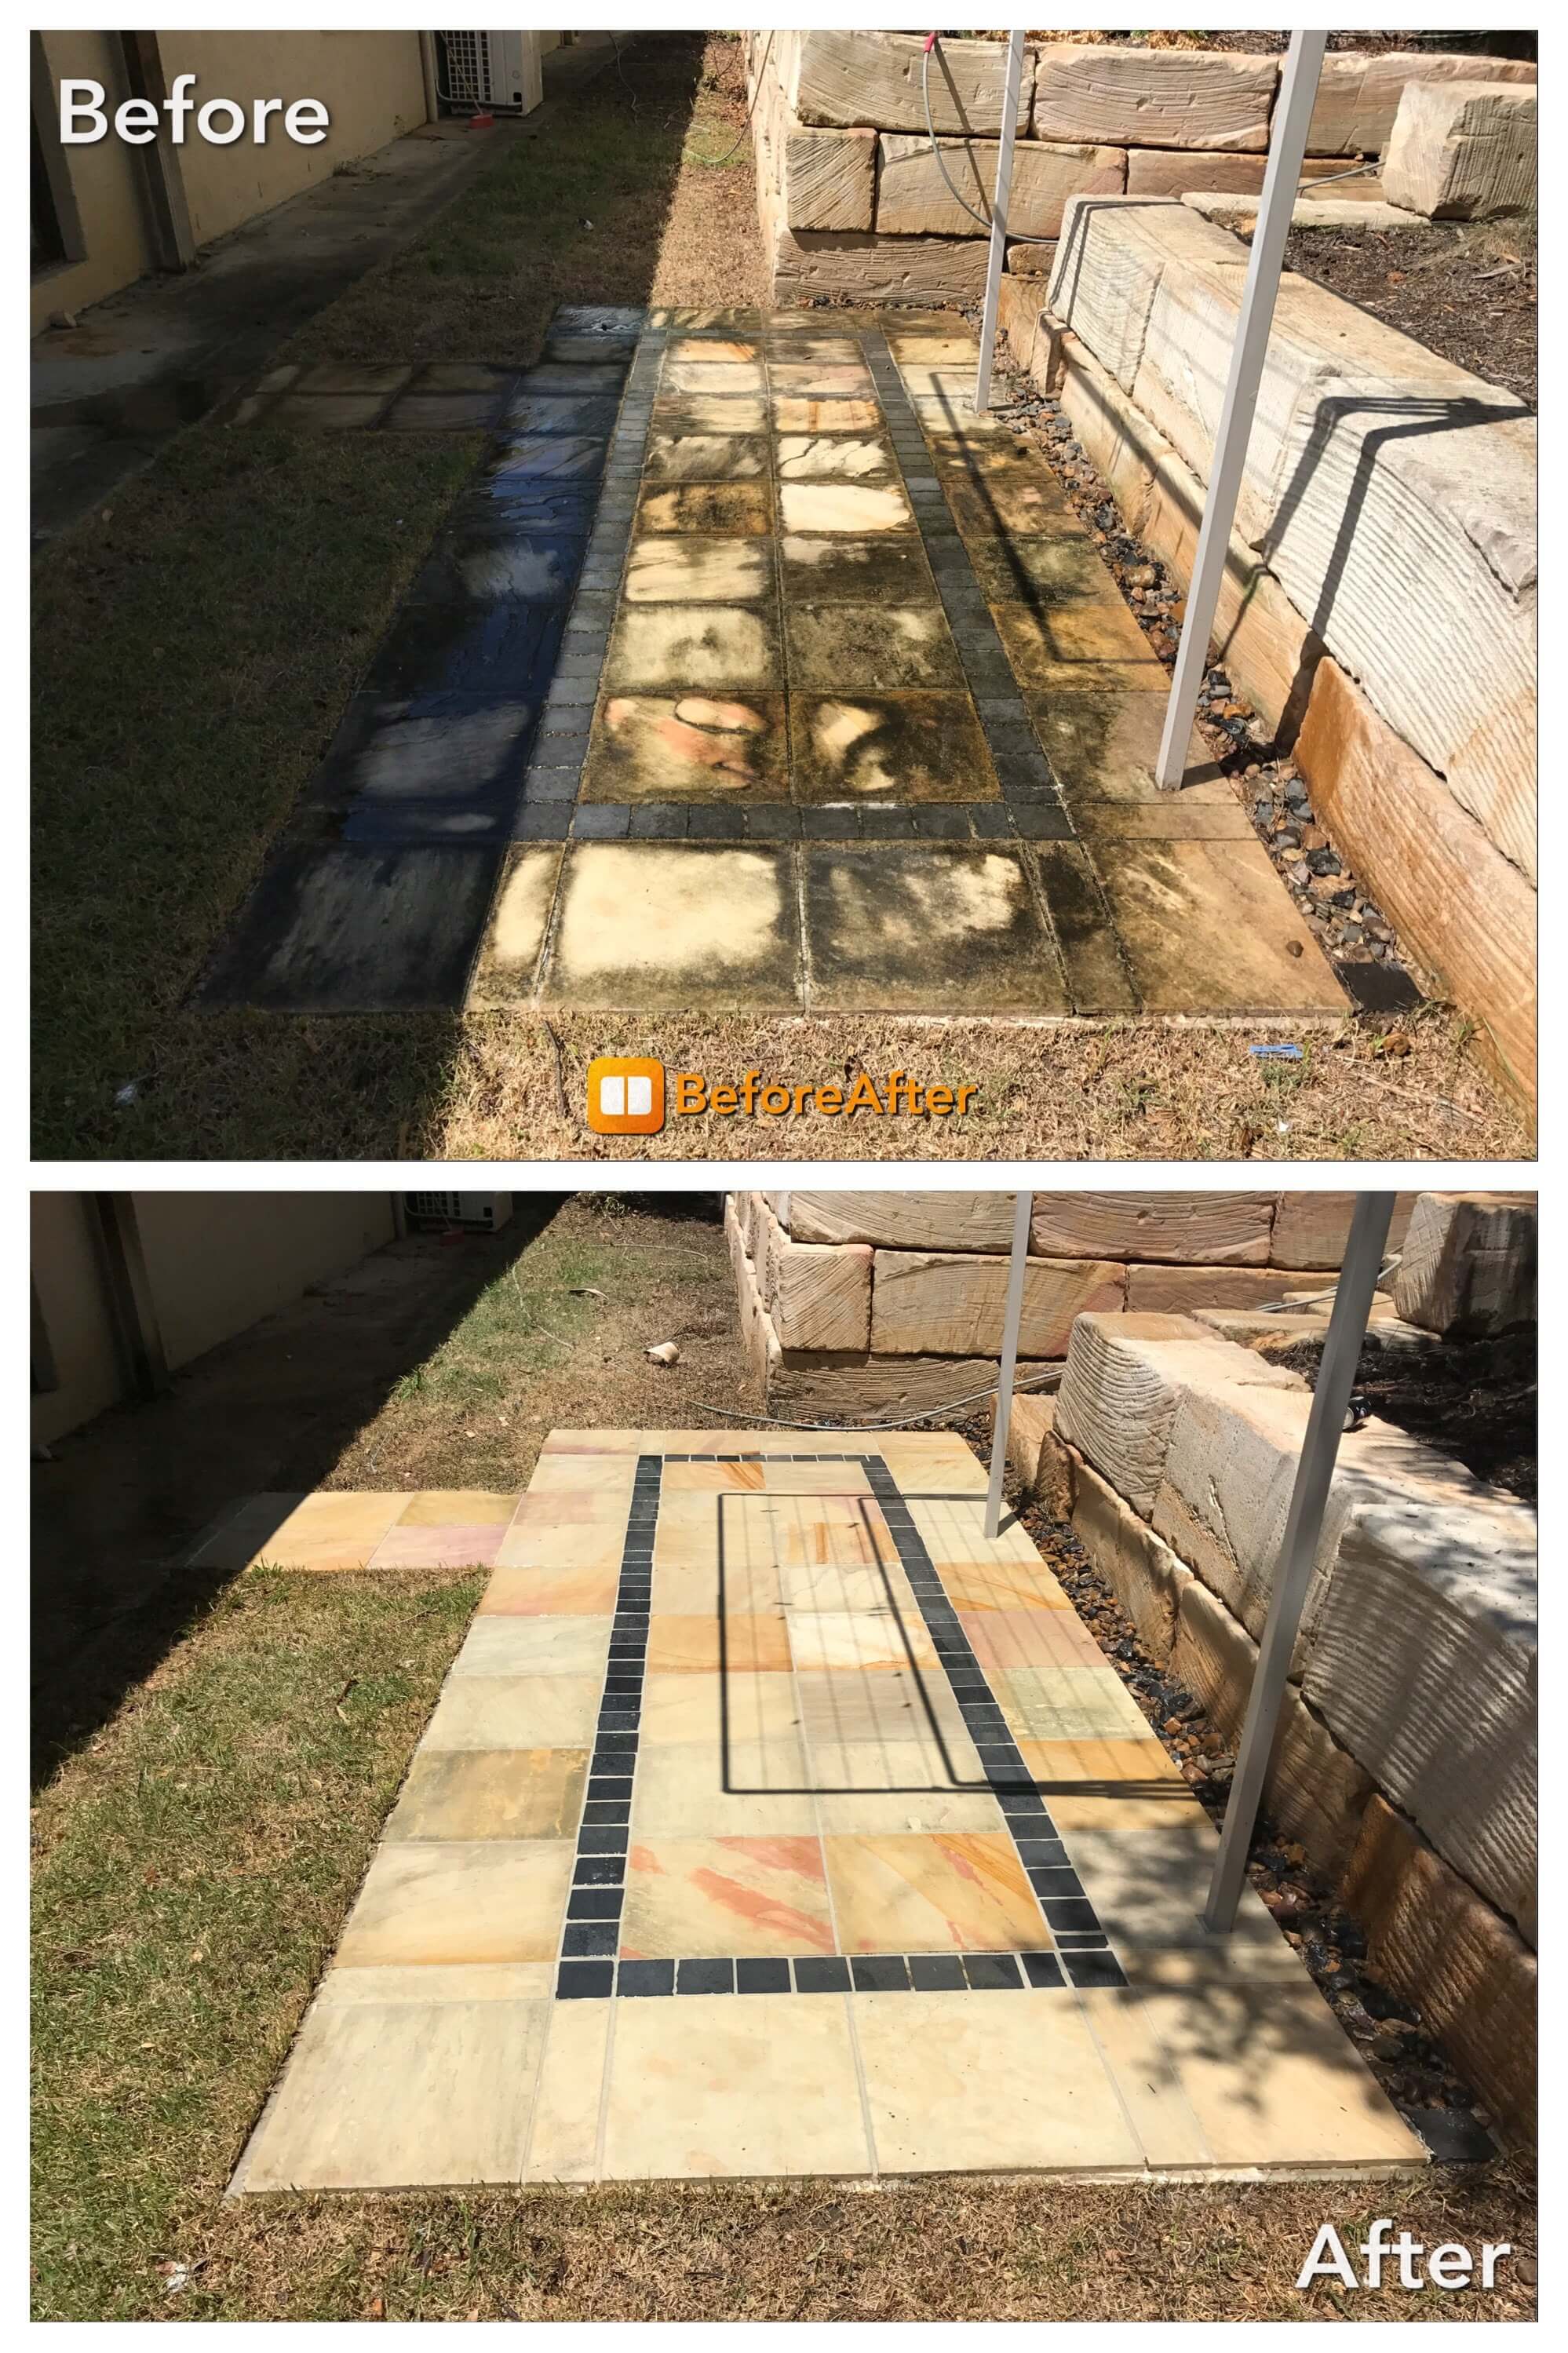 Before and after professionally cleaning patio tiles